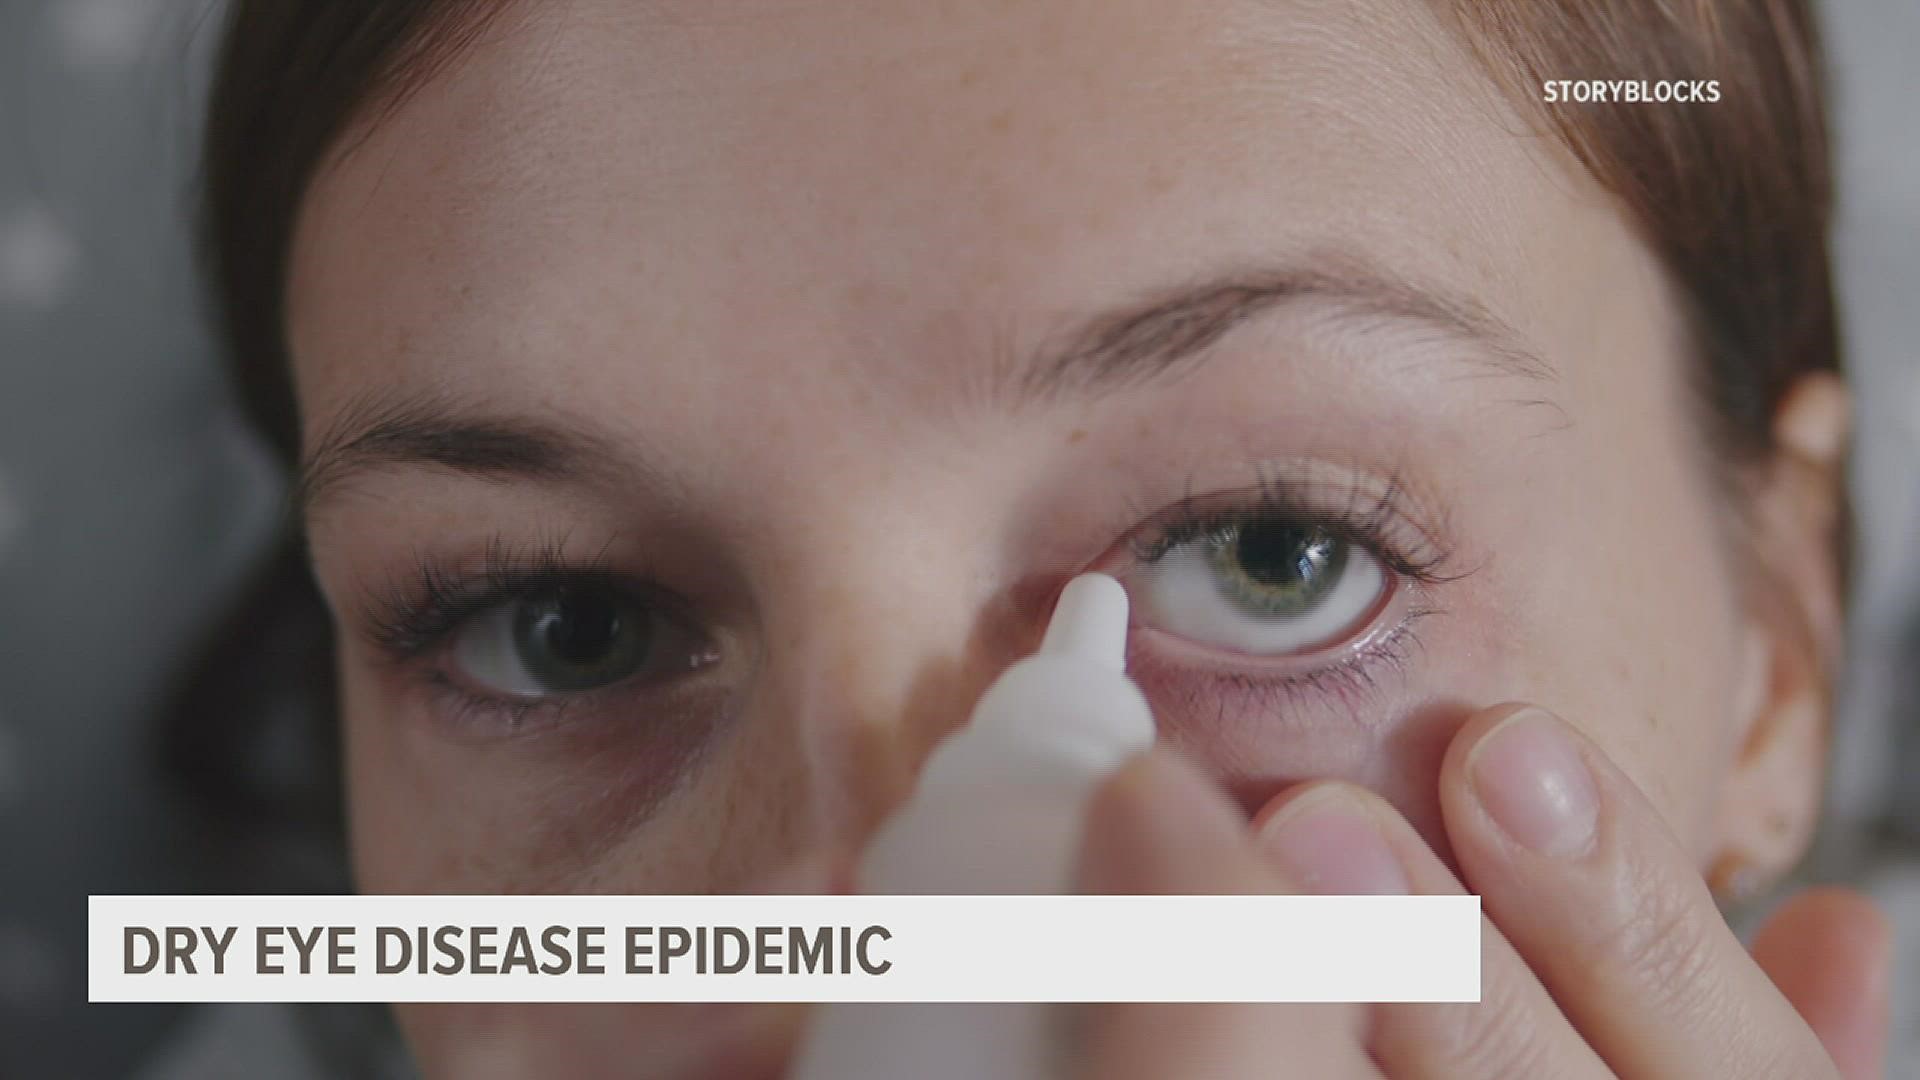 A local eye doctor shares tips and treatment options for the epidemic that affects millions of people and is on the rise.